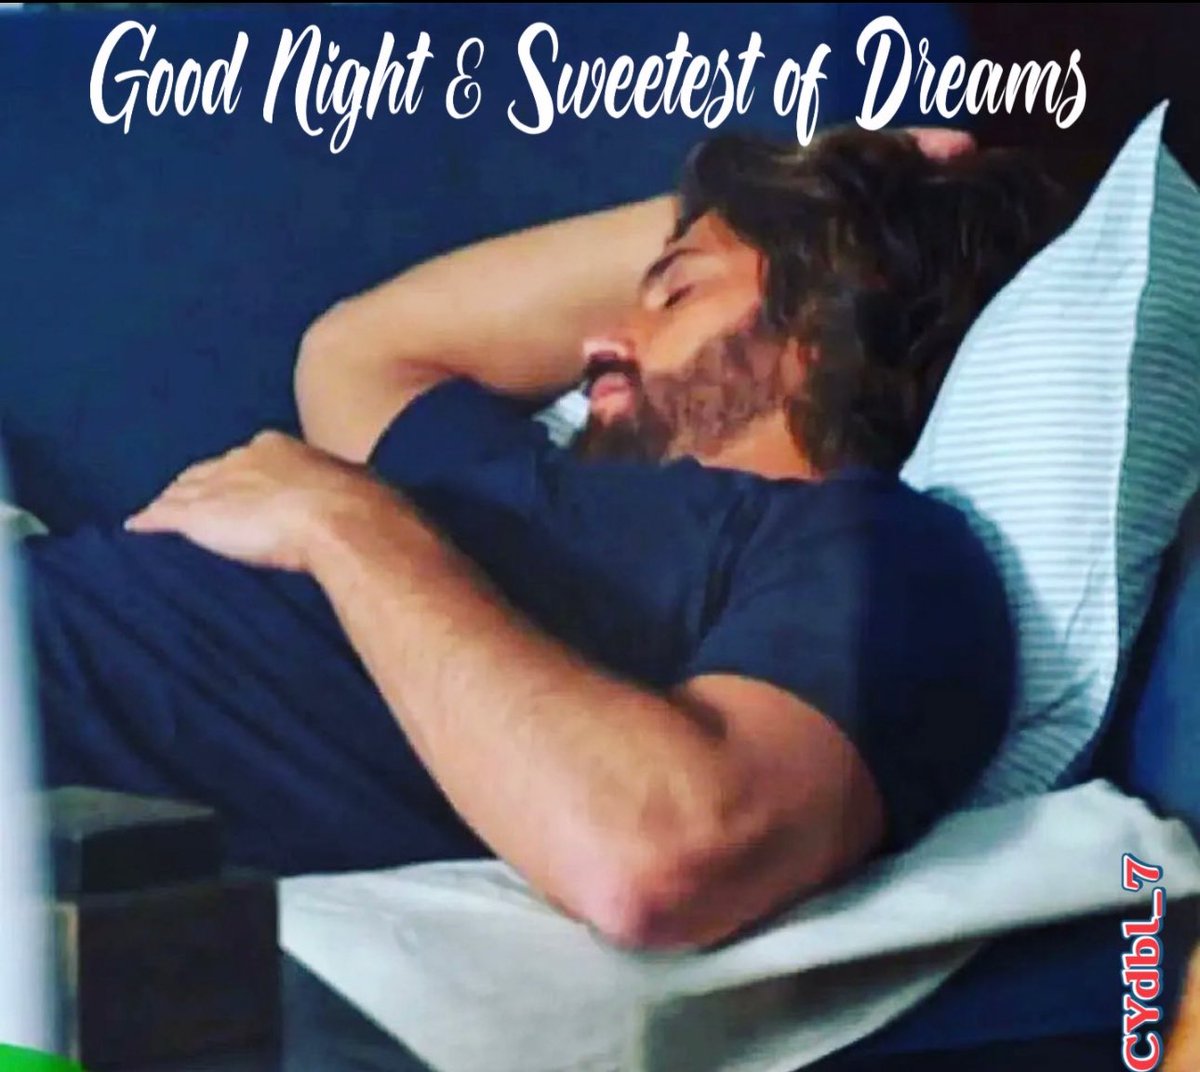 CYAmericaFans50 wishes everyone in the CYFandom🌎 a Relaxing Spring Evening and a peaceful and restful Good Night! Hope you’ve had a Blessed & Marvelous Monday ❣️
#CanYaman #ViolaComeIlMare2
#ElTurco #SandokanTheSeries CanYamanAmericaFans50